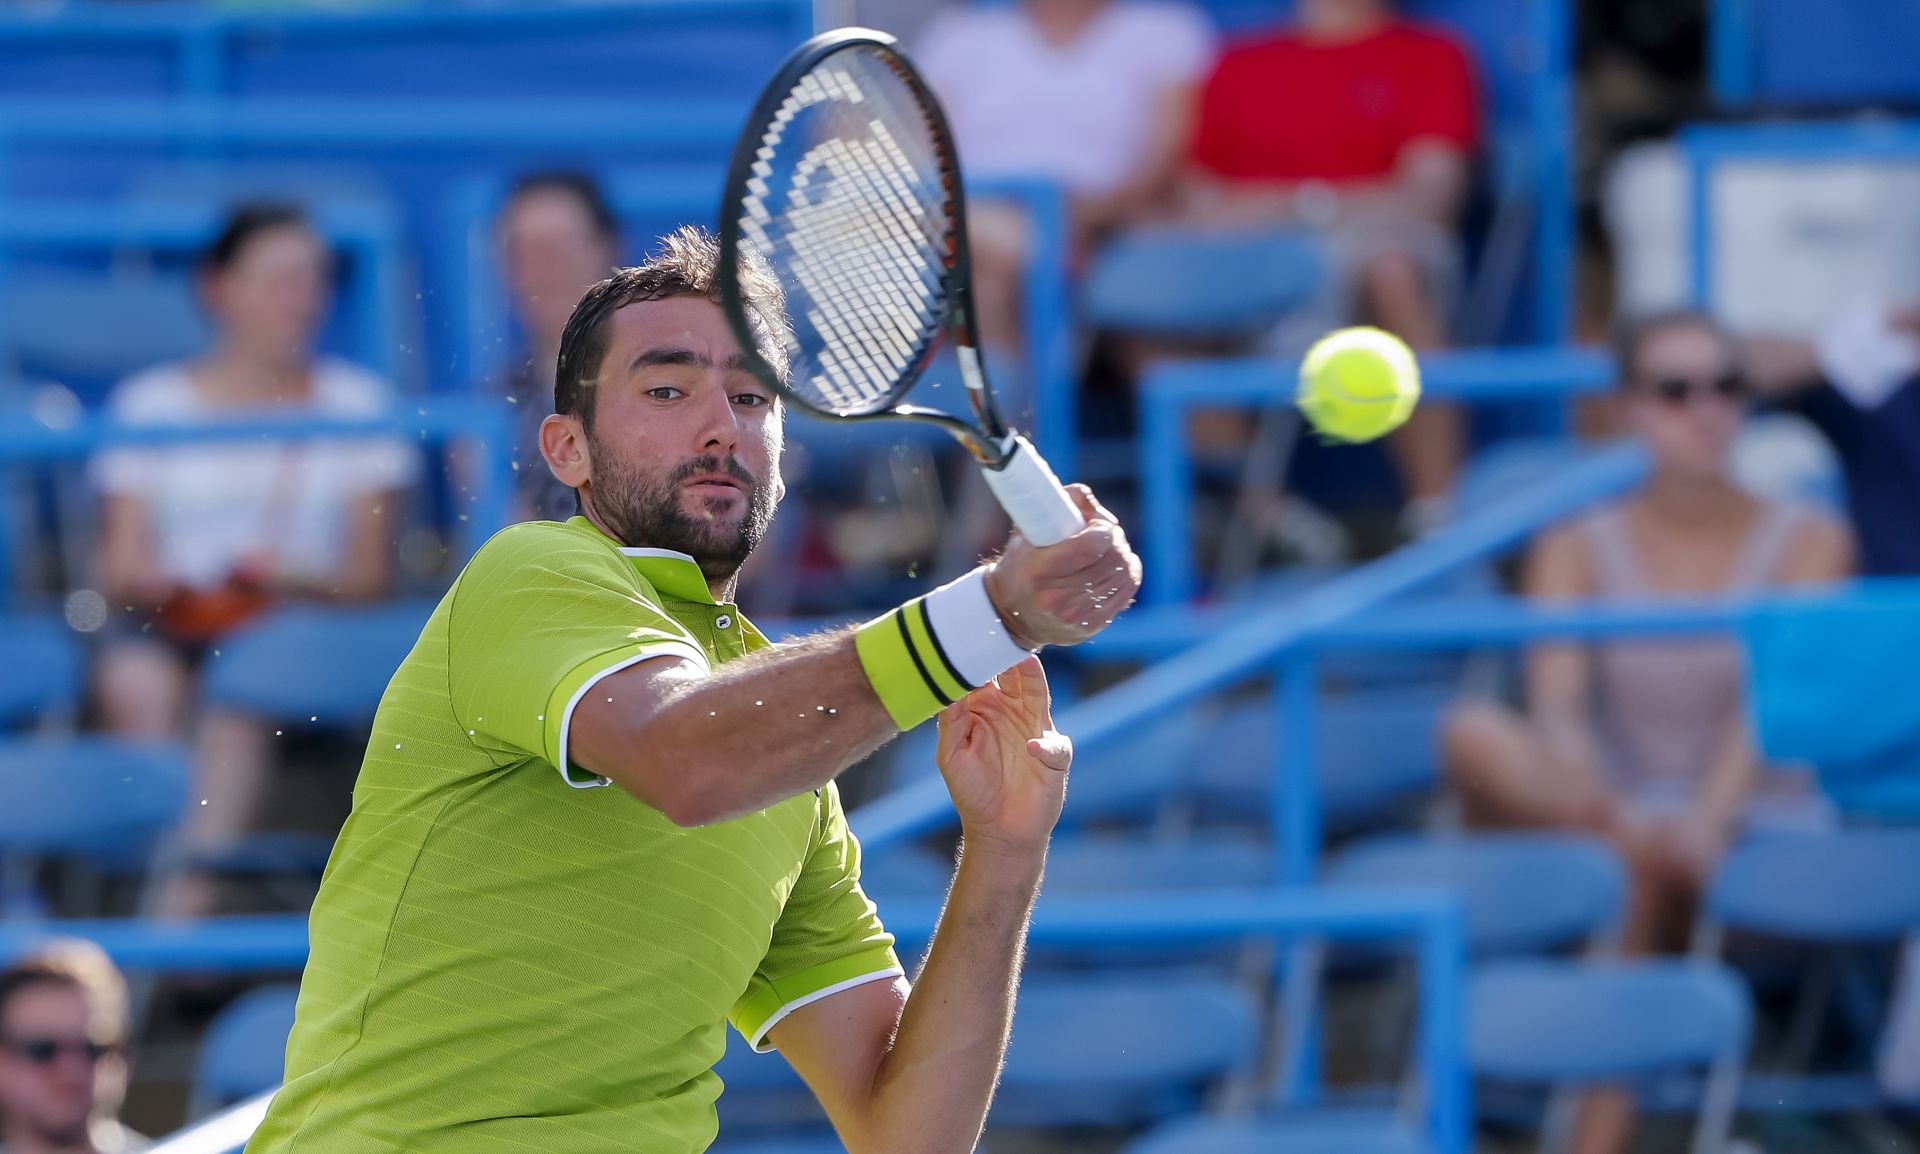 epa07754180 Marin Cilic of Croatia in action against Daniil Medvedev of Russia during a quarterfinal round match in the Citi Open tennis tournament at the Rock Creek Park Tennis Center in Washington, DC, USA, 02 August 2019.  EPA/ERIK S. LESSER